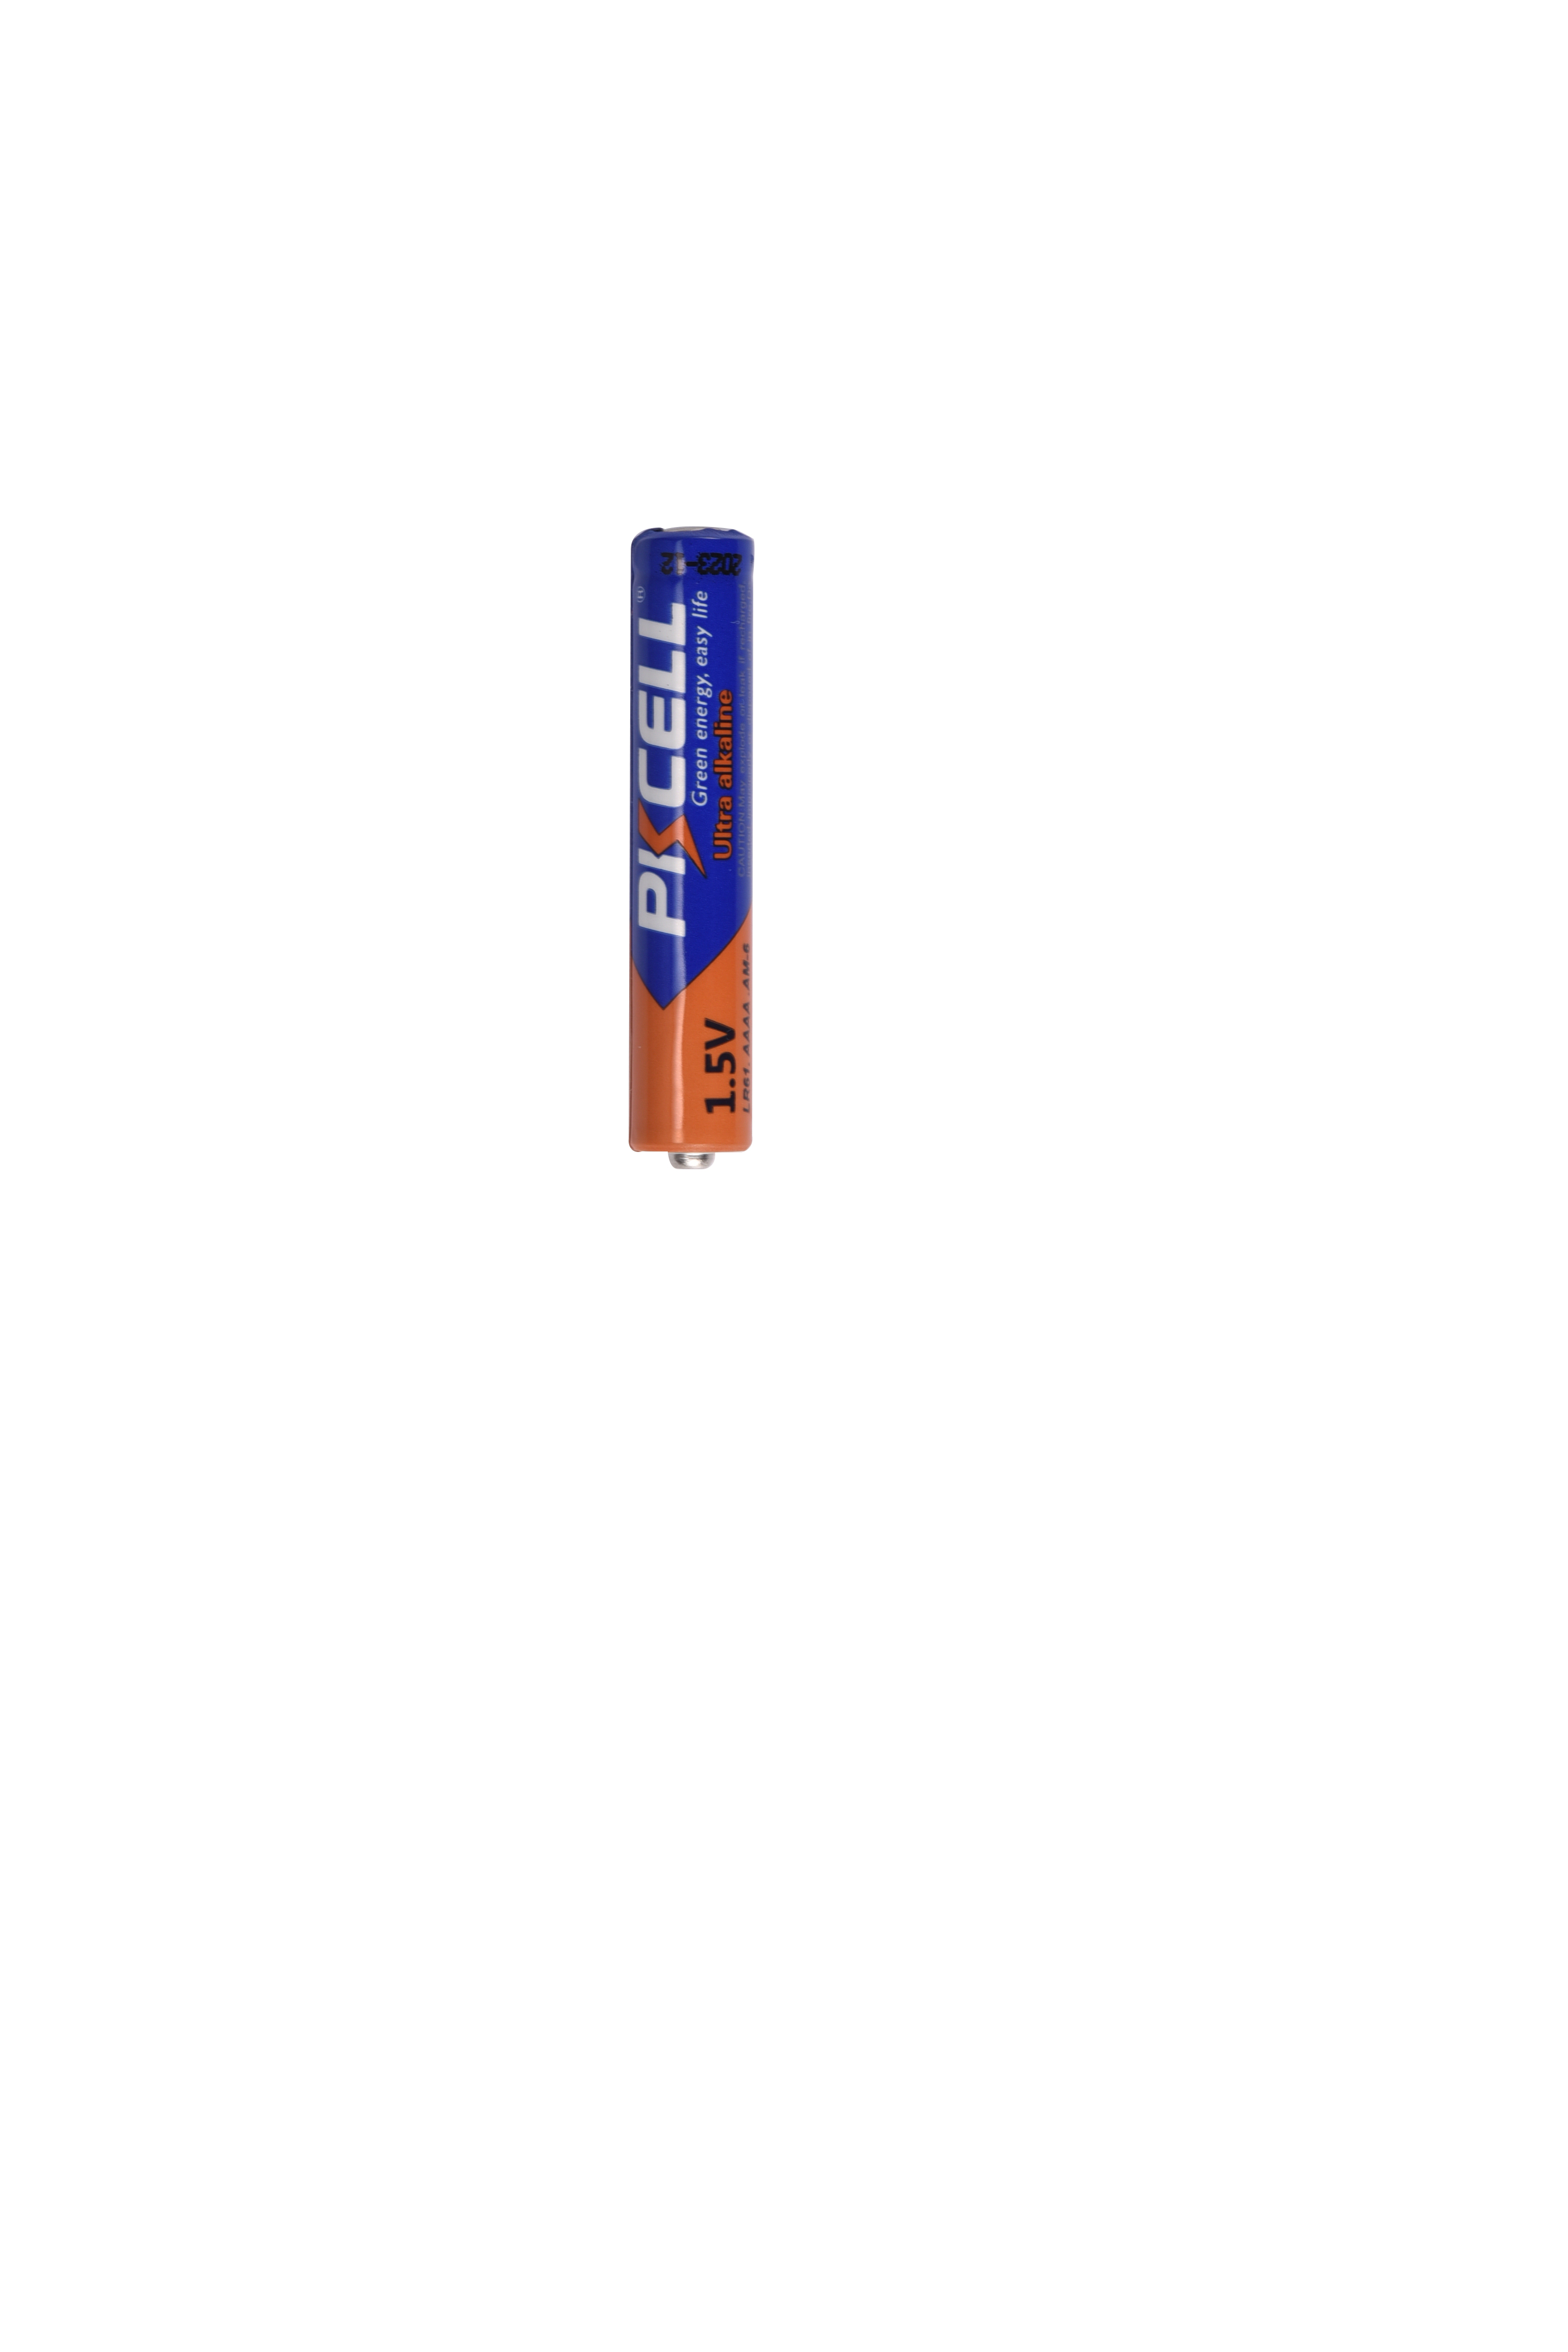 10PCS AAAA Battery PKCELL 1.5V LR61 AM6 Alkaline Battery MN2500 E96 4A Dry Primary Battery